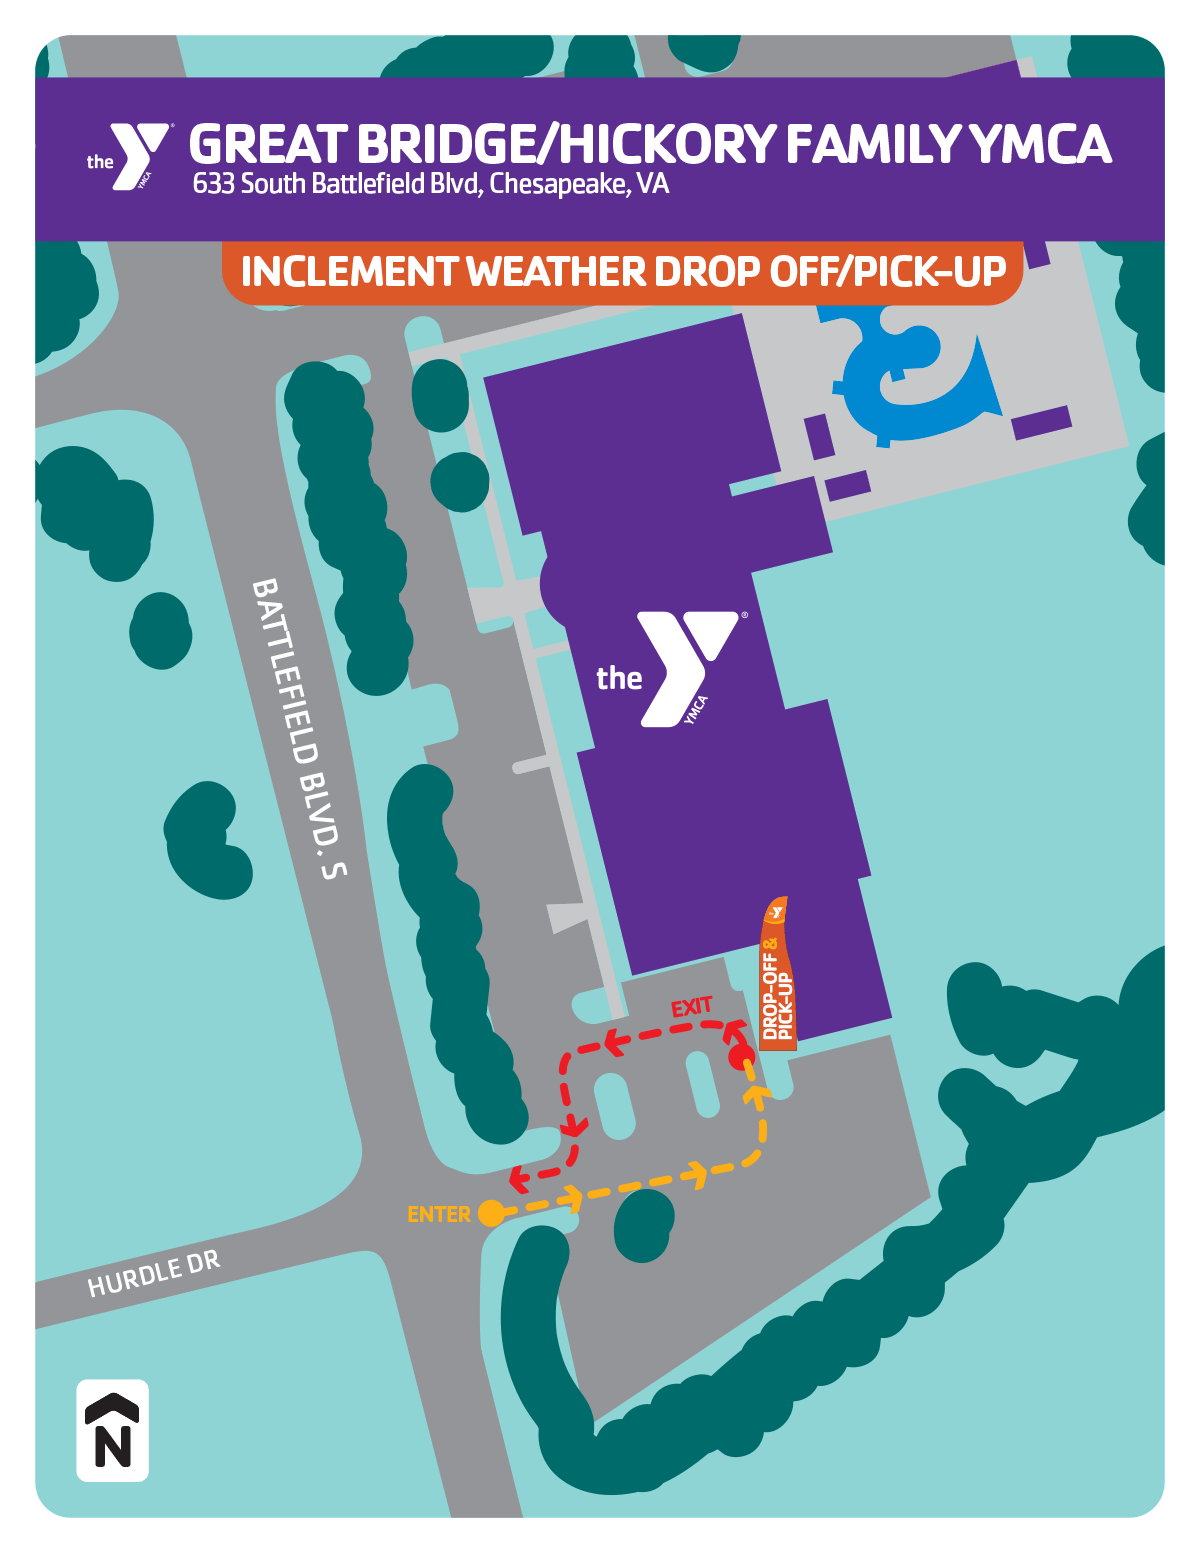 Summer camp inclement weather drop-off & pick-up locations for the Great Bridge/Hickory Family YMCA